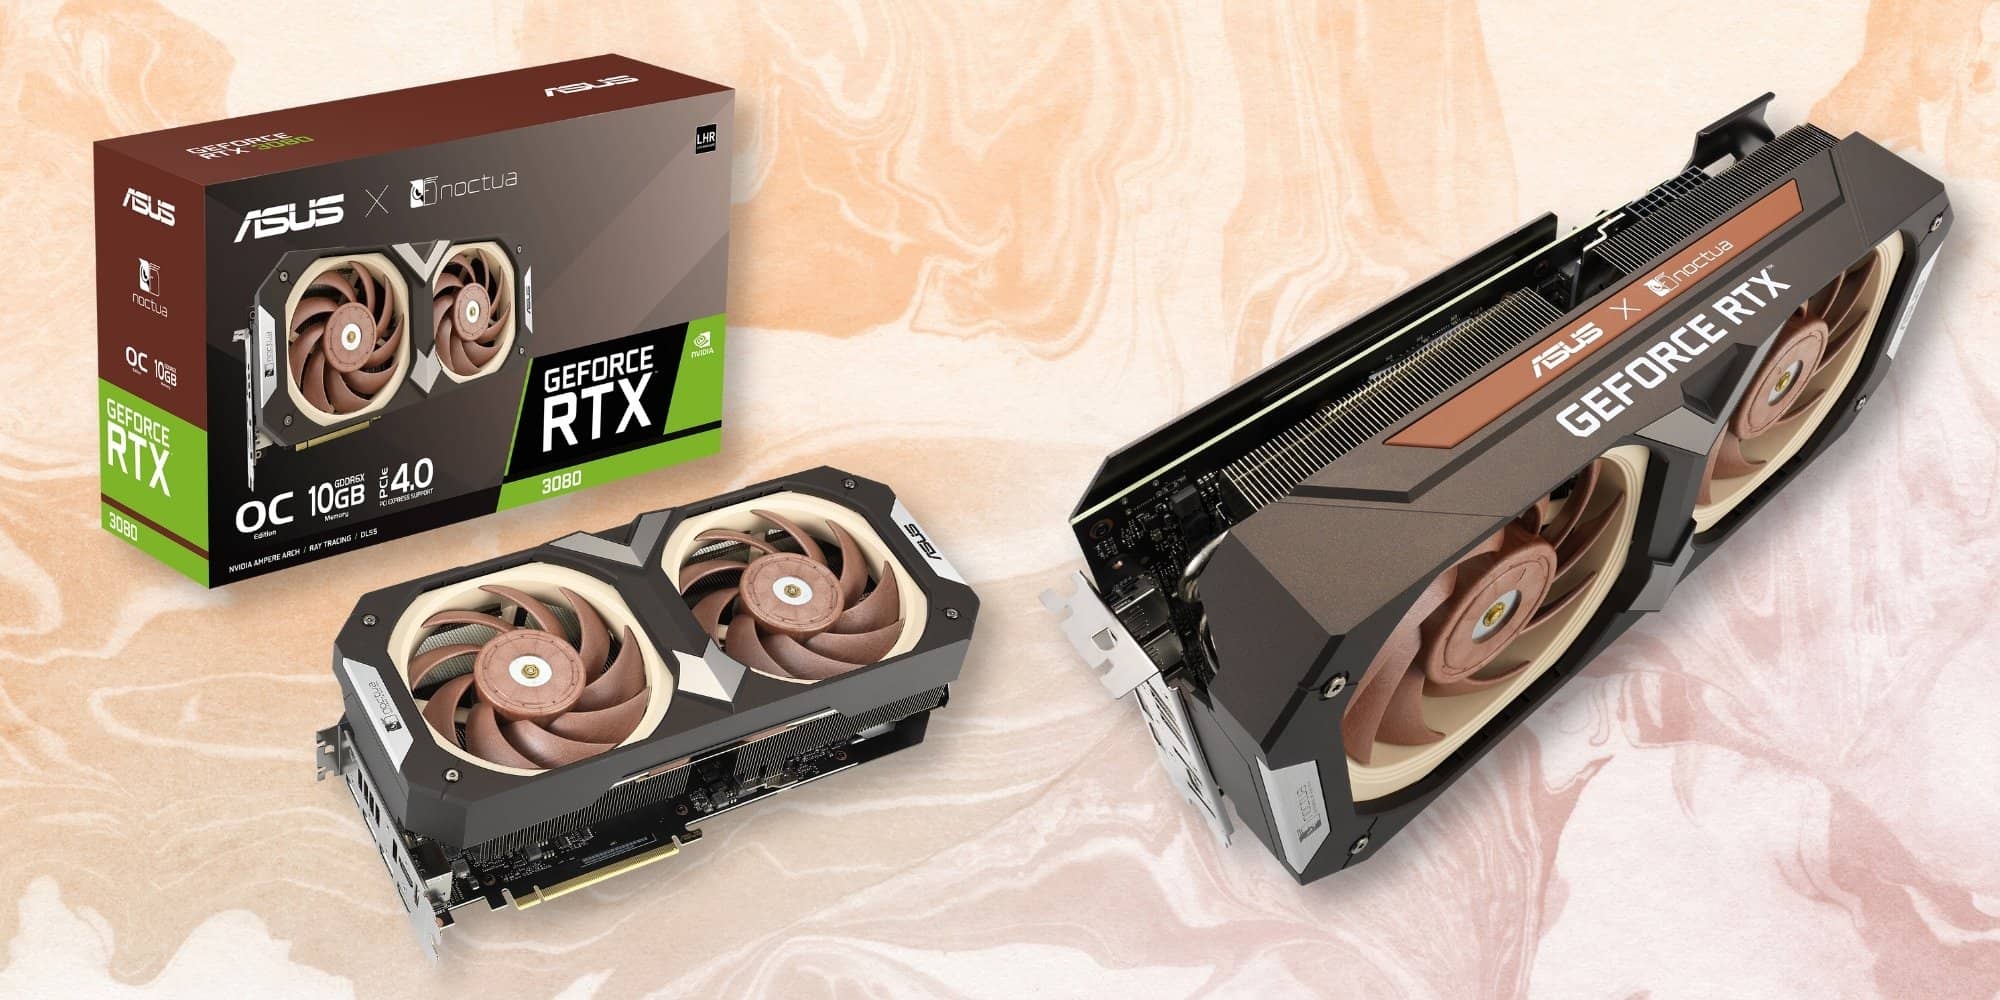 ASUS Republic of Gamers Announces Availability of Award-Winning Rapture GT-AXE16000